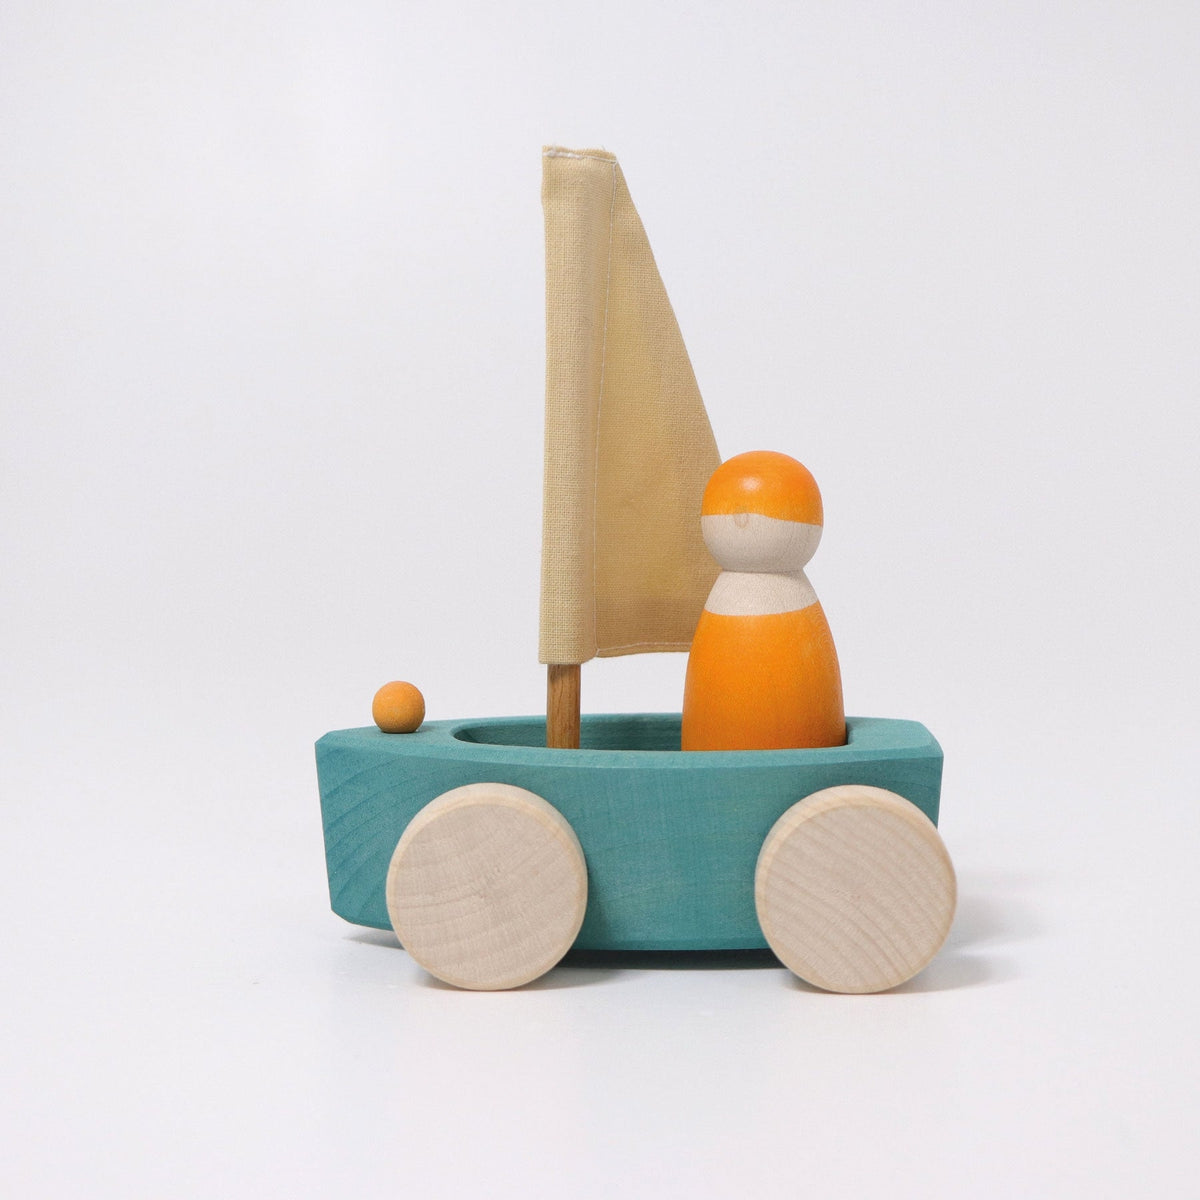 Ogas red mini wooden sailboat – Dilly Dally Kids